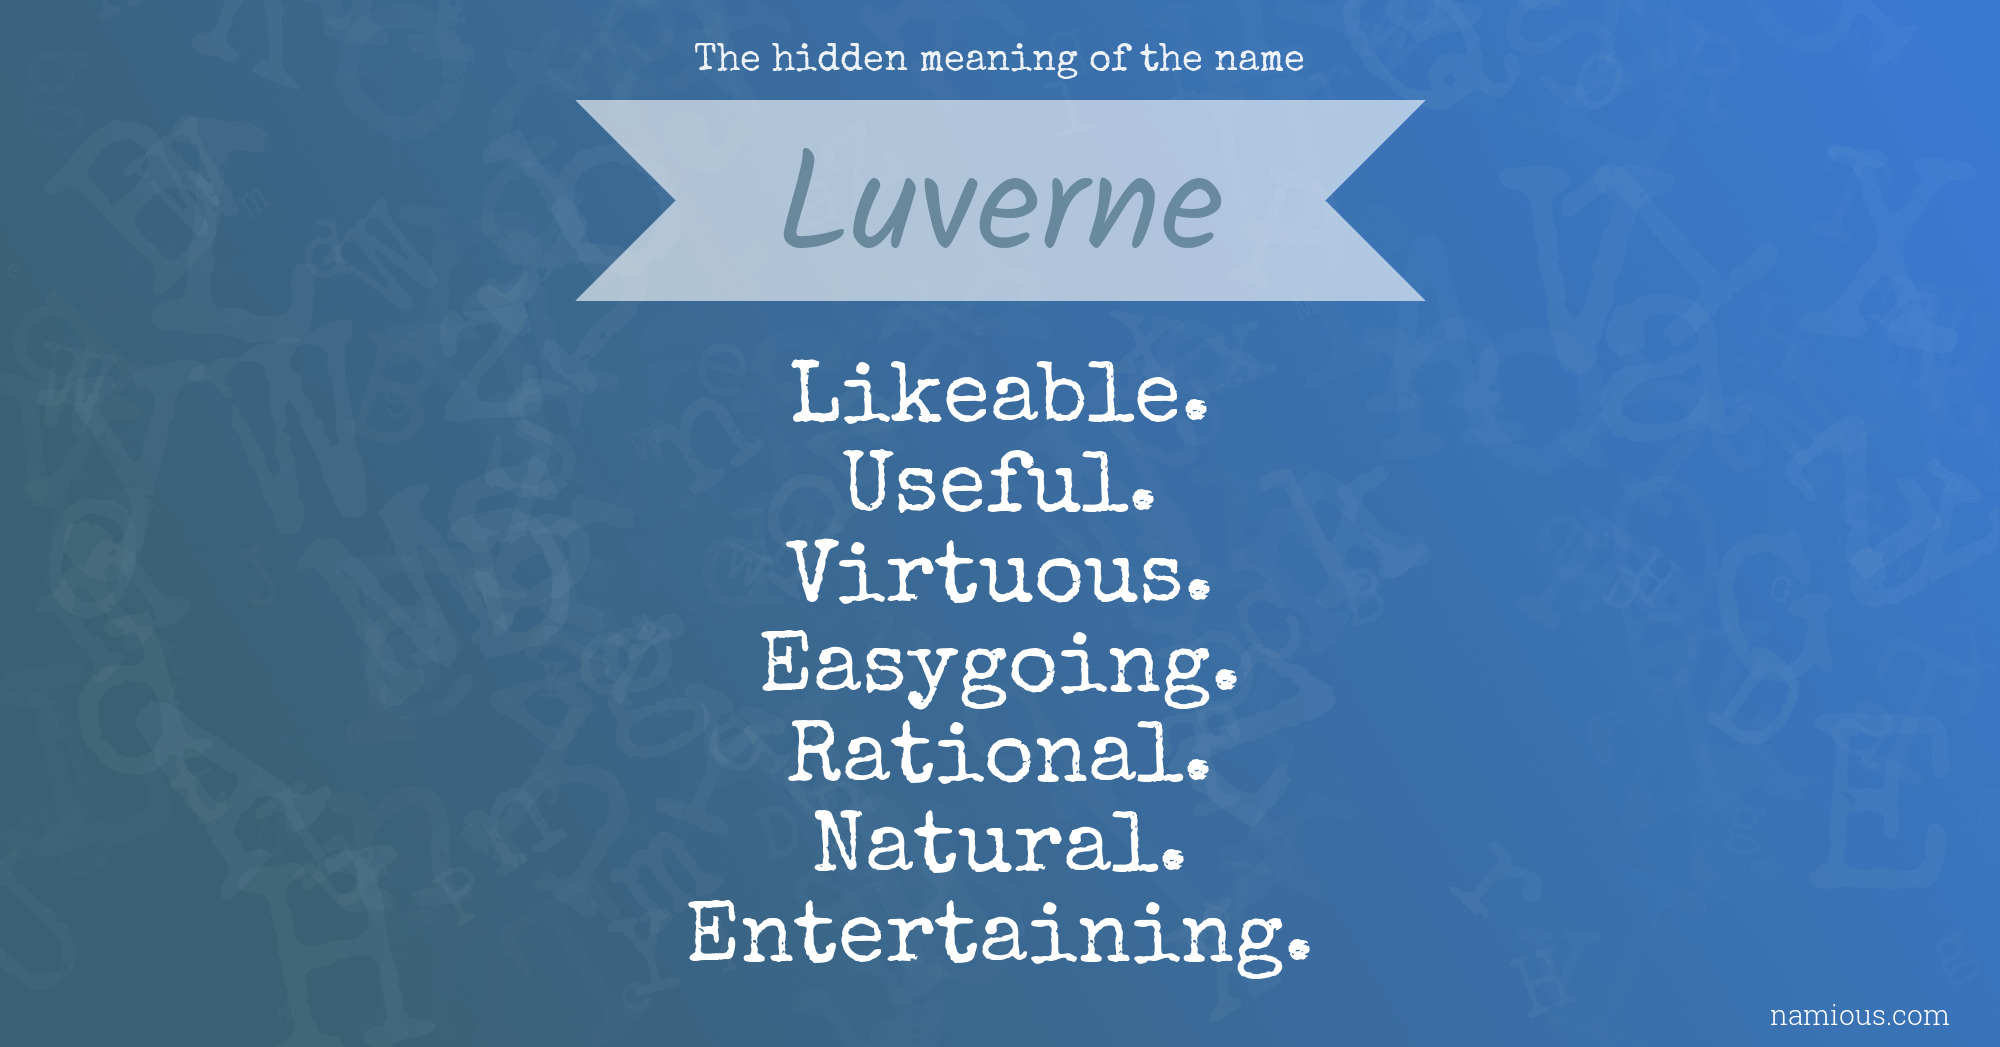 The hidden meaning of the name Luverne